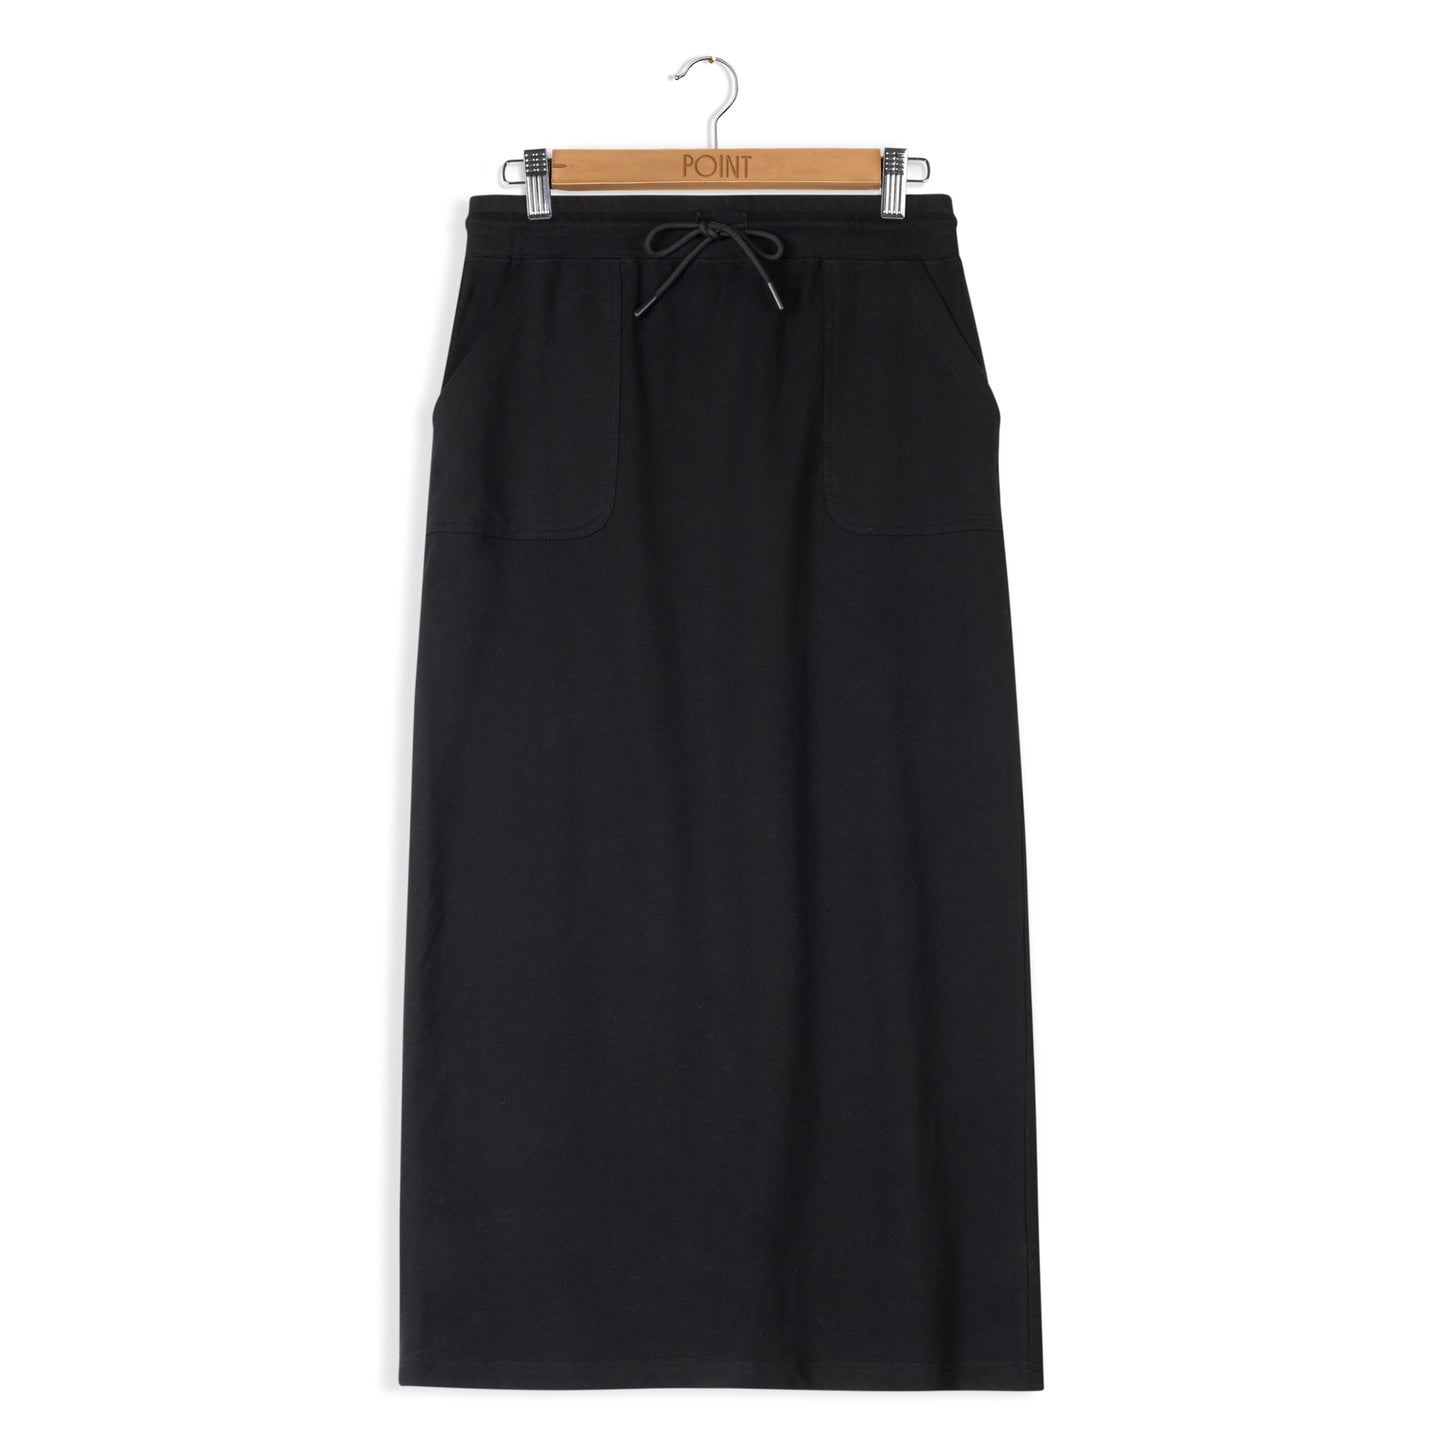 point maxi skirt with pkt